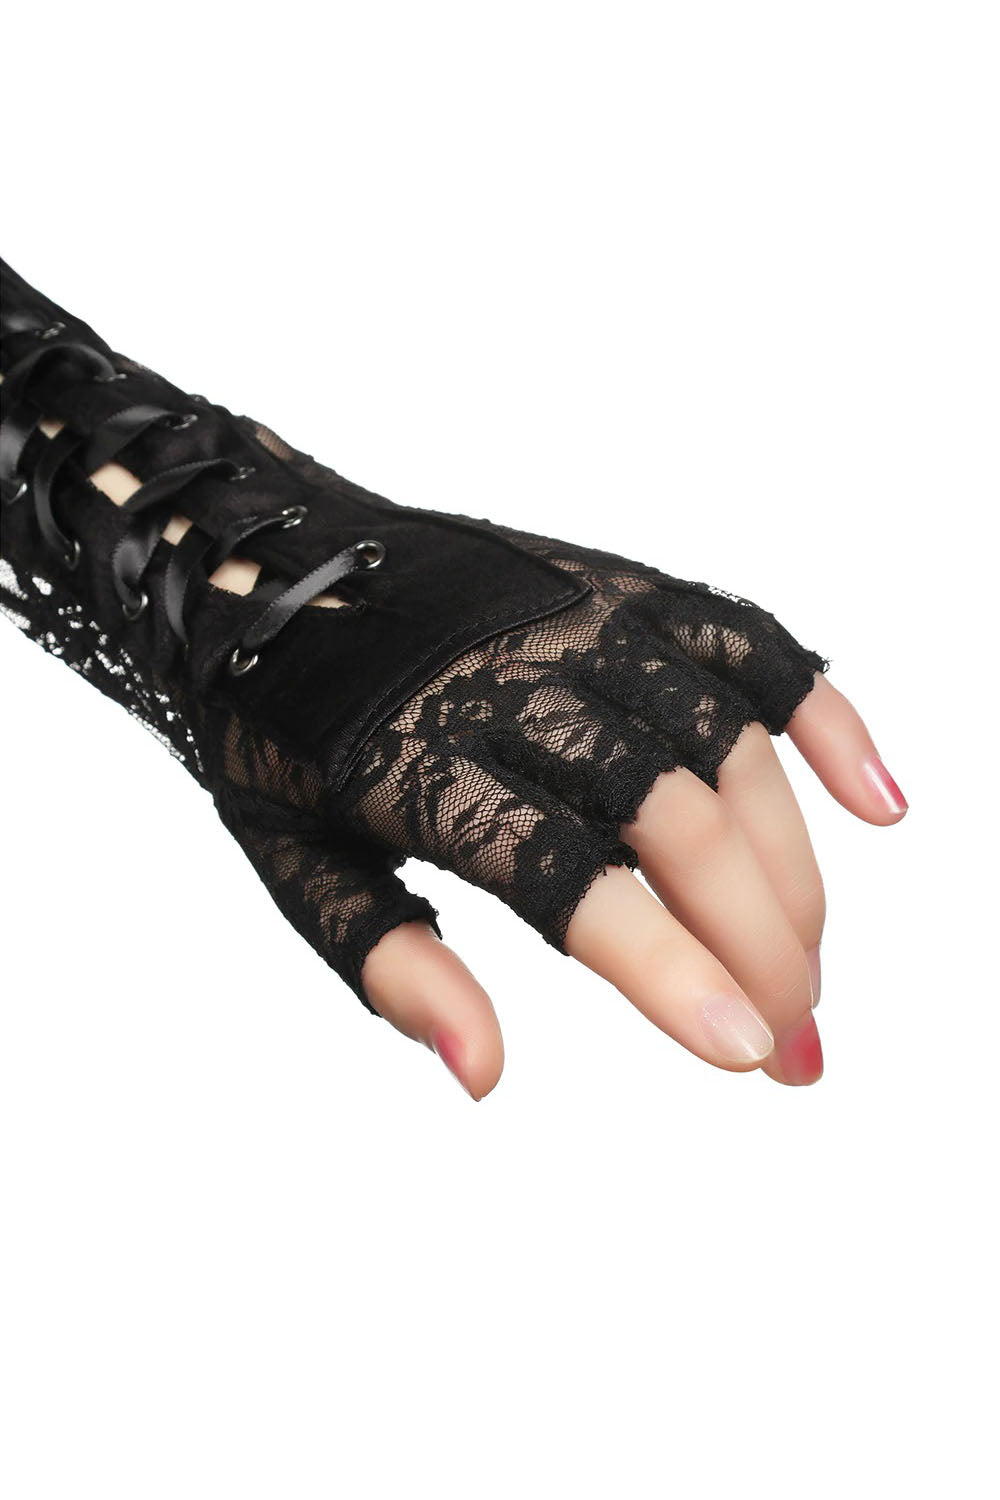 womens goth corset lace gloves